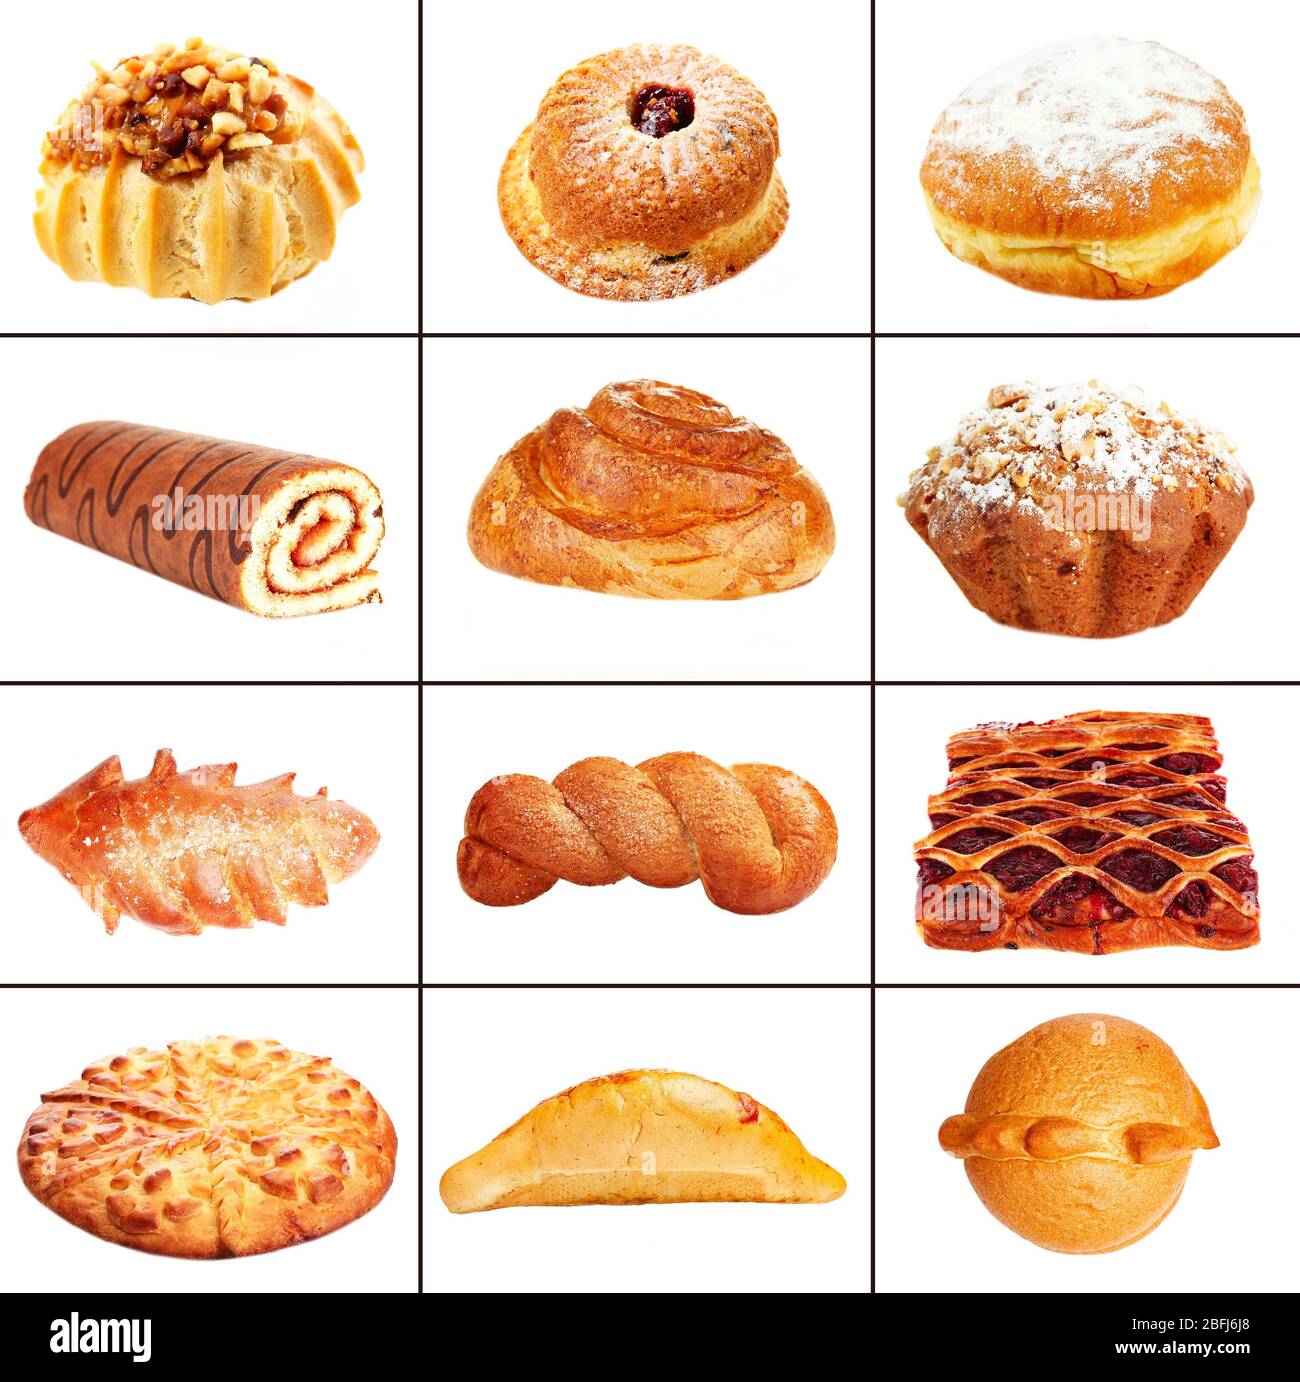 Collage of different pastries and bakery items, isolated on white Stock Photo